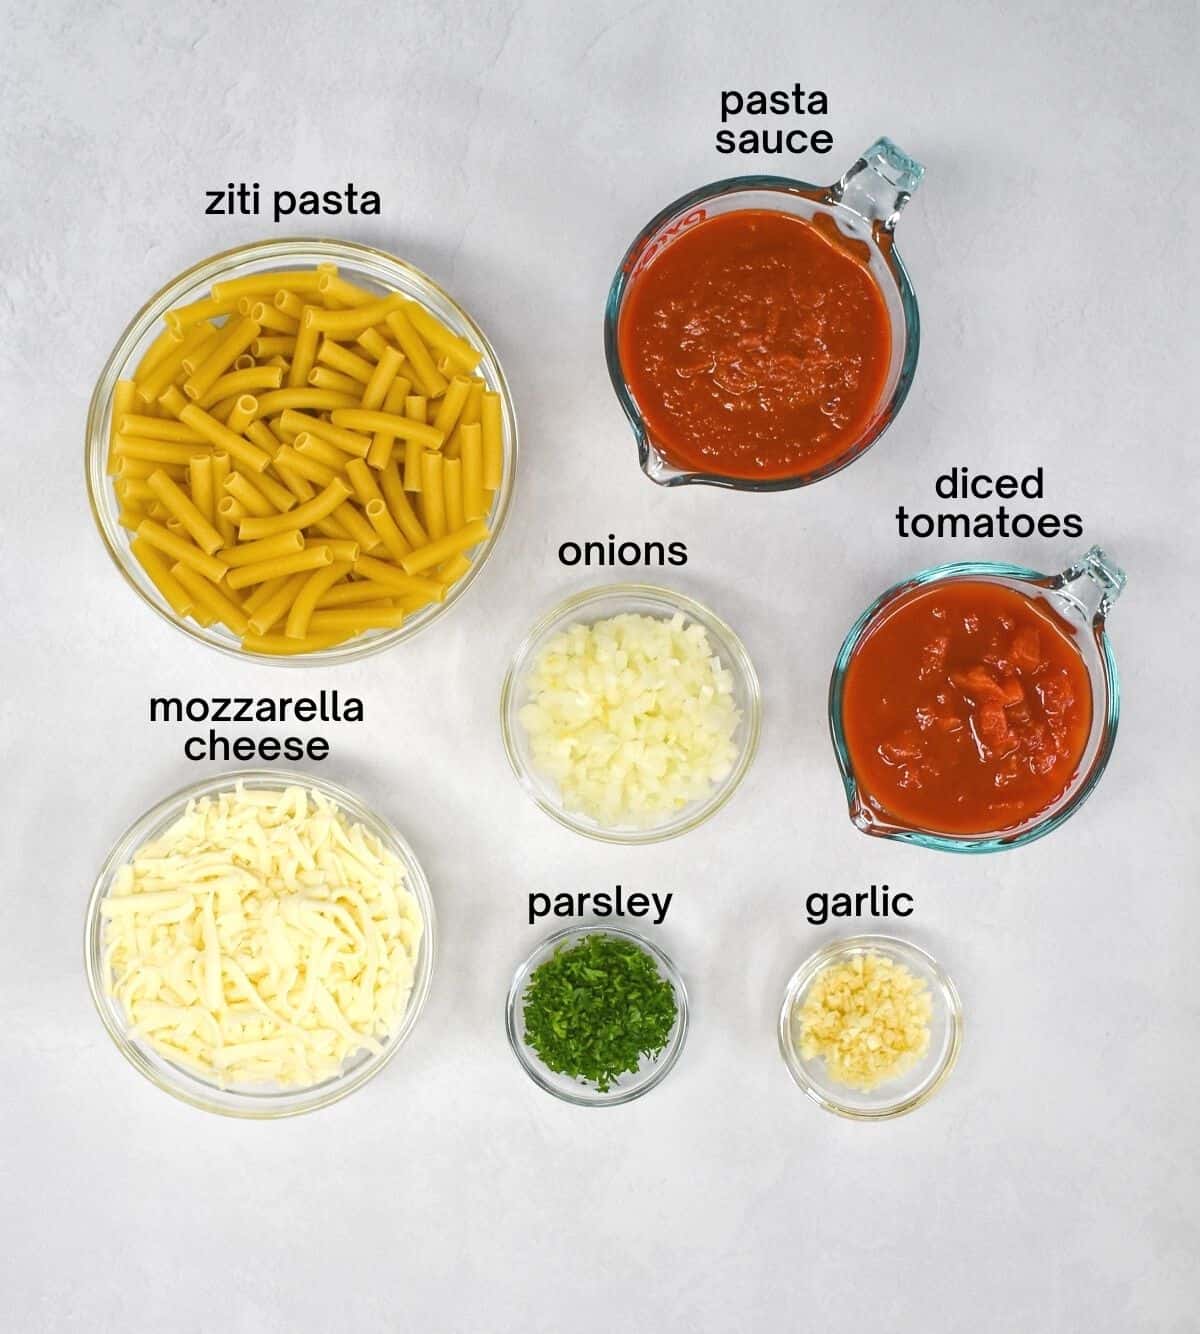 The ingredients for the sauce, pasta and casserole arranged in clear bowls on a white table.